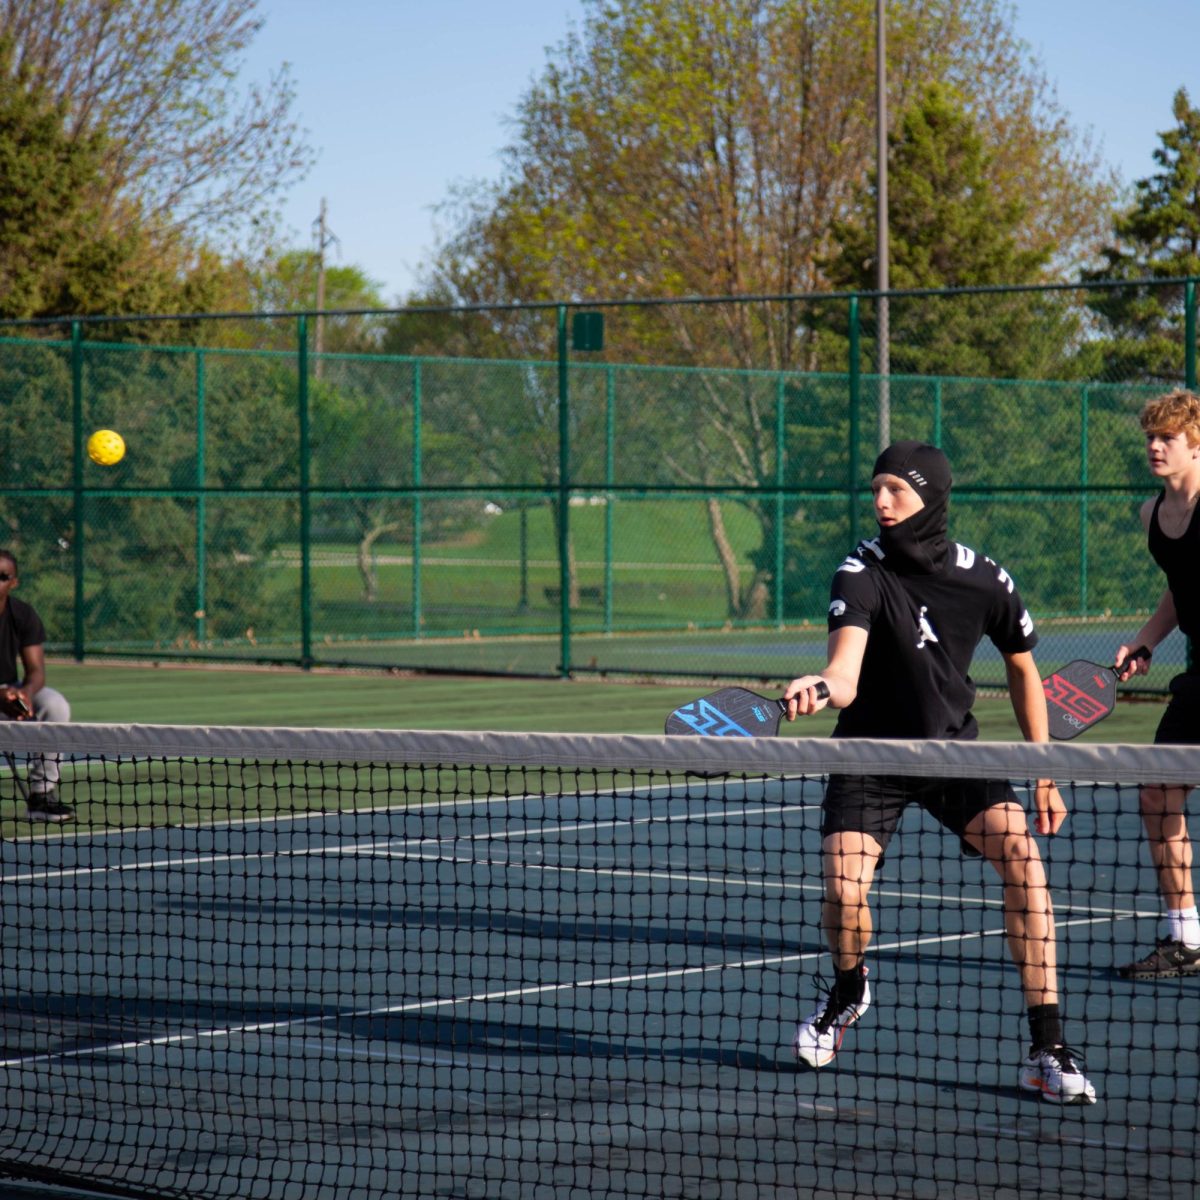 For many of the pickleball players, spending time with friends is just as much a part of the league as the game itself. The league is built to be flexible in working around players’ schedules. Because many of the players involved with the Ankeny Pickleball League are busy with other sports and activities, teams are open to finding any time to play, even if it means getting up early on a weekend for a game. 

On Sunday, May, the Houston Red Rockets and the Big Picklers went head-to-head in an early morning match-up. Sophomore Hayden Carlson hits the ball over the net.